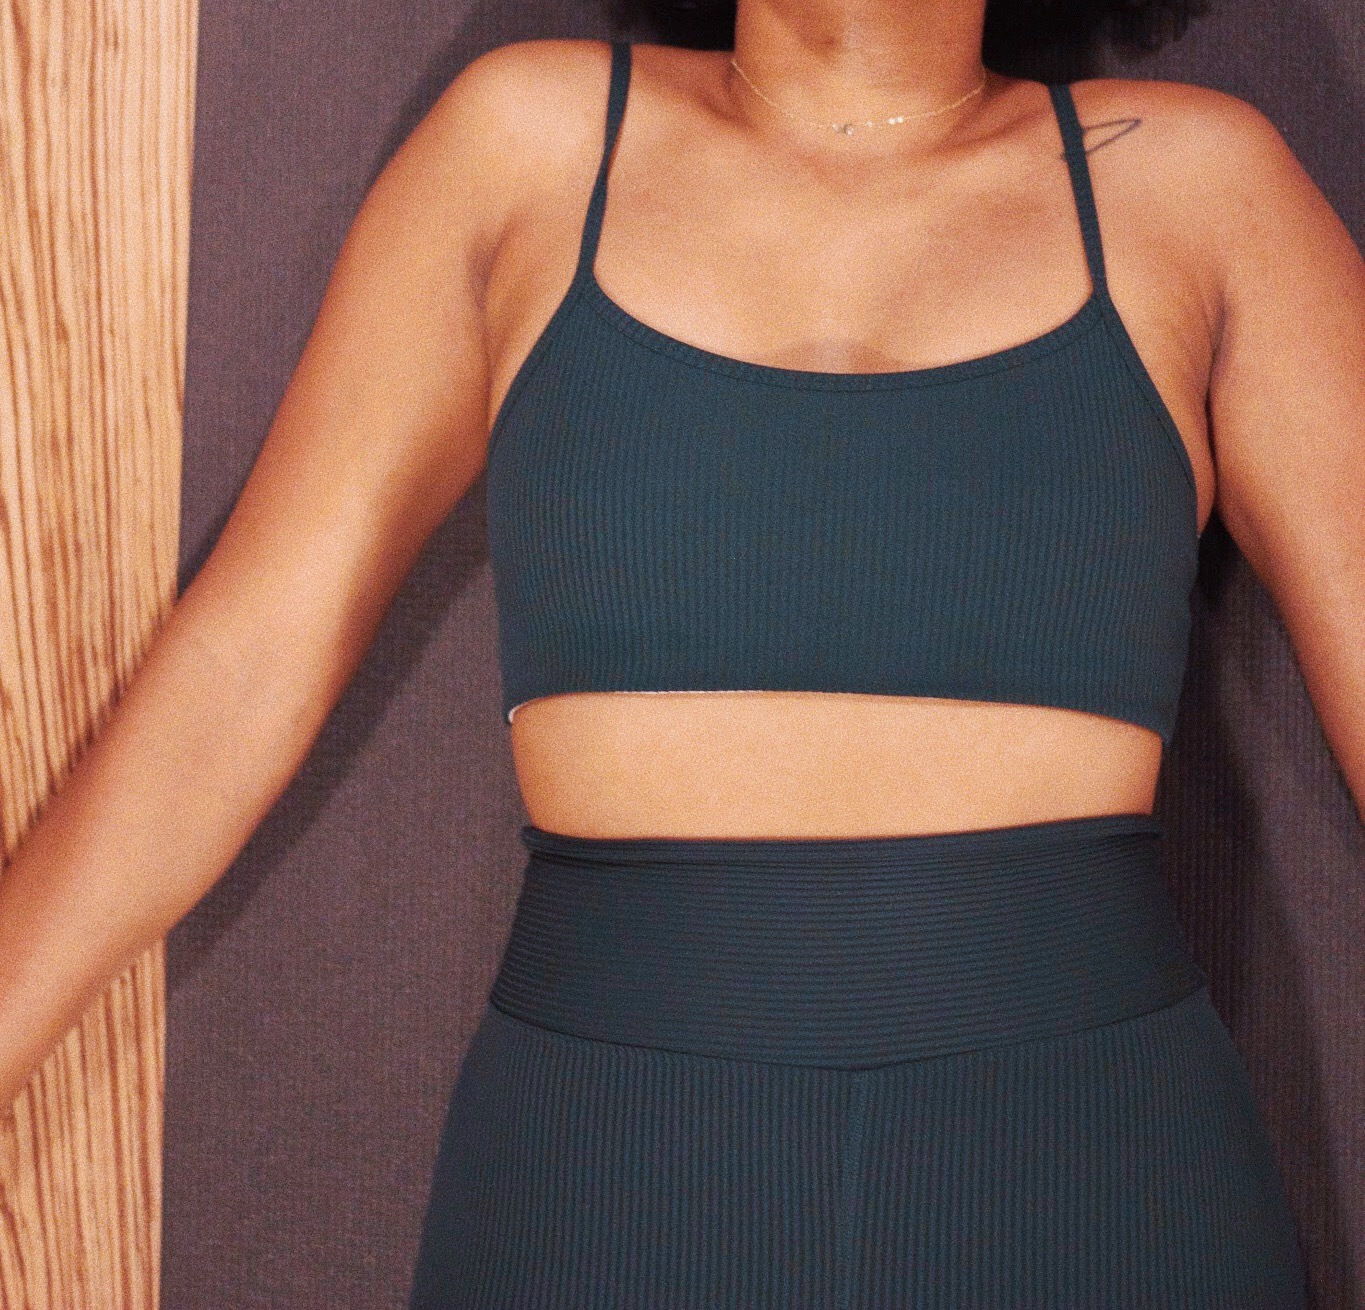 Year of ours workout yoga outfit ribbed cute yoga athleisure clothes. Core power yoga sculp heated yoga review first time. Black girl yoga nyc wellness blogger